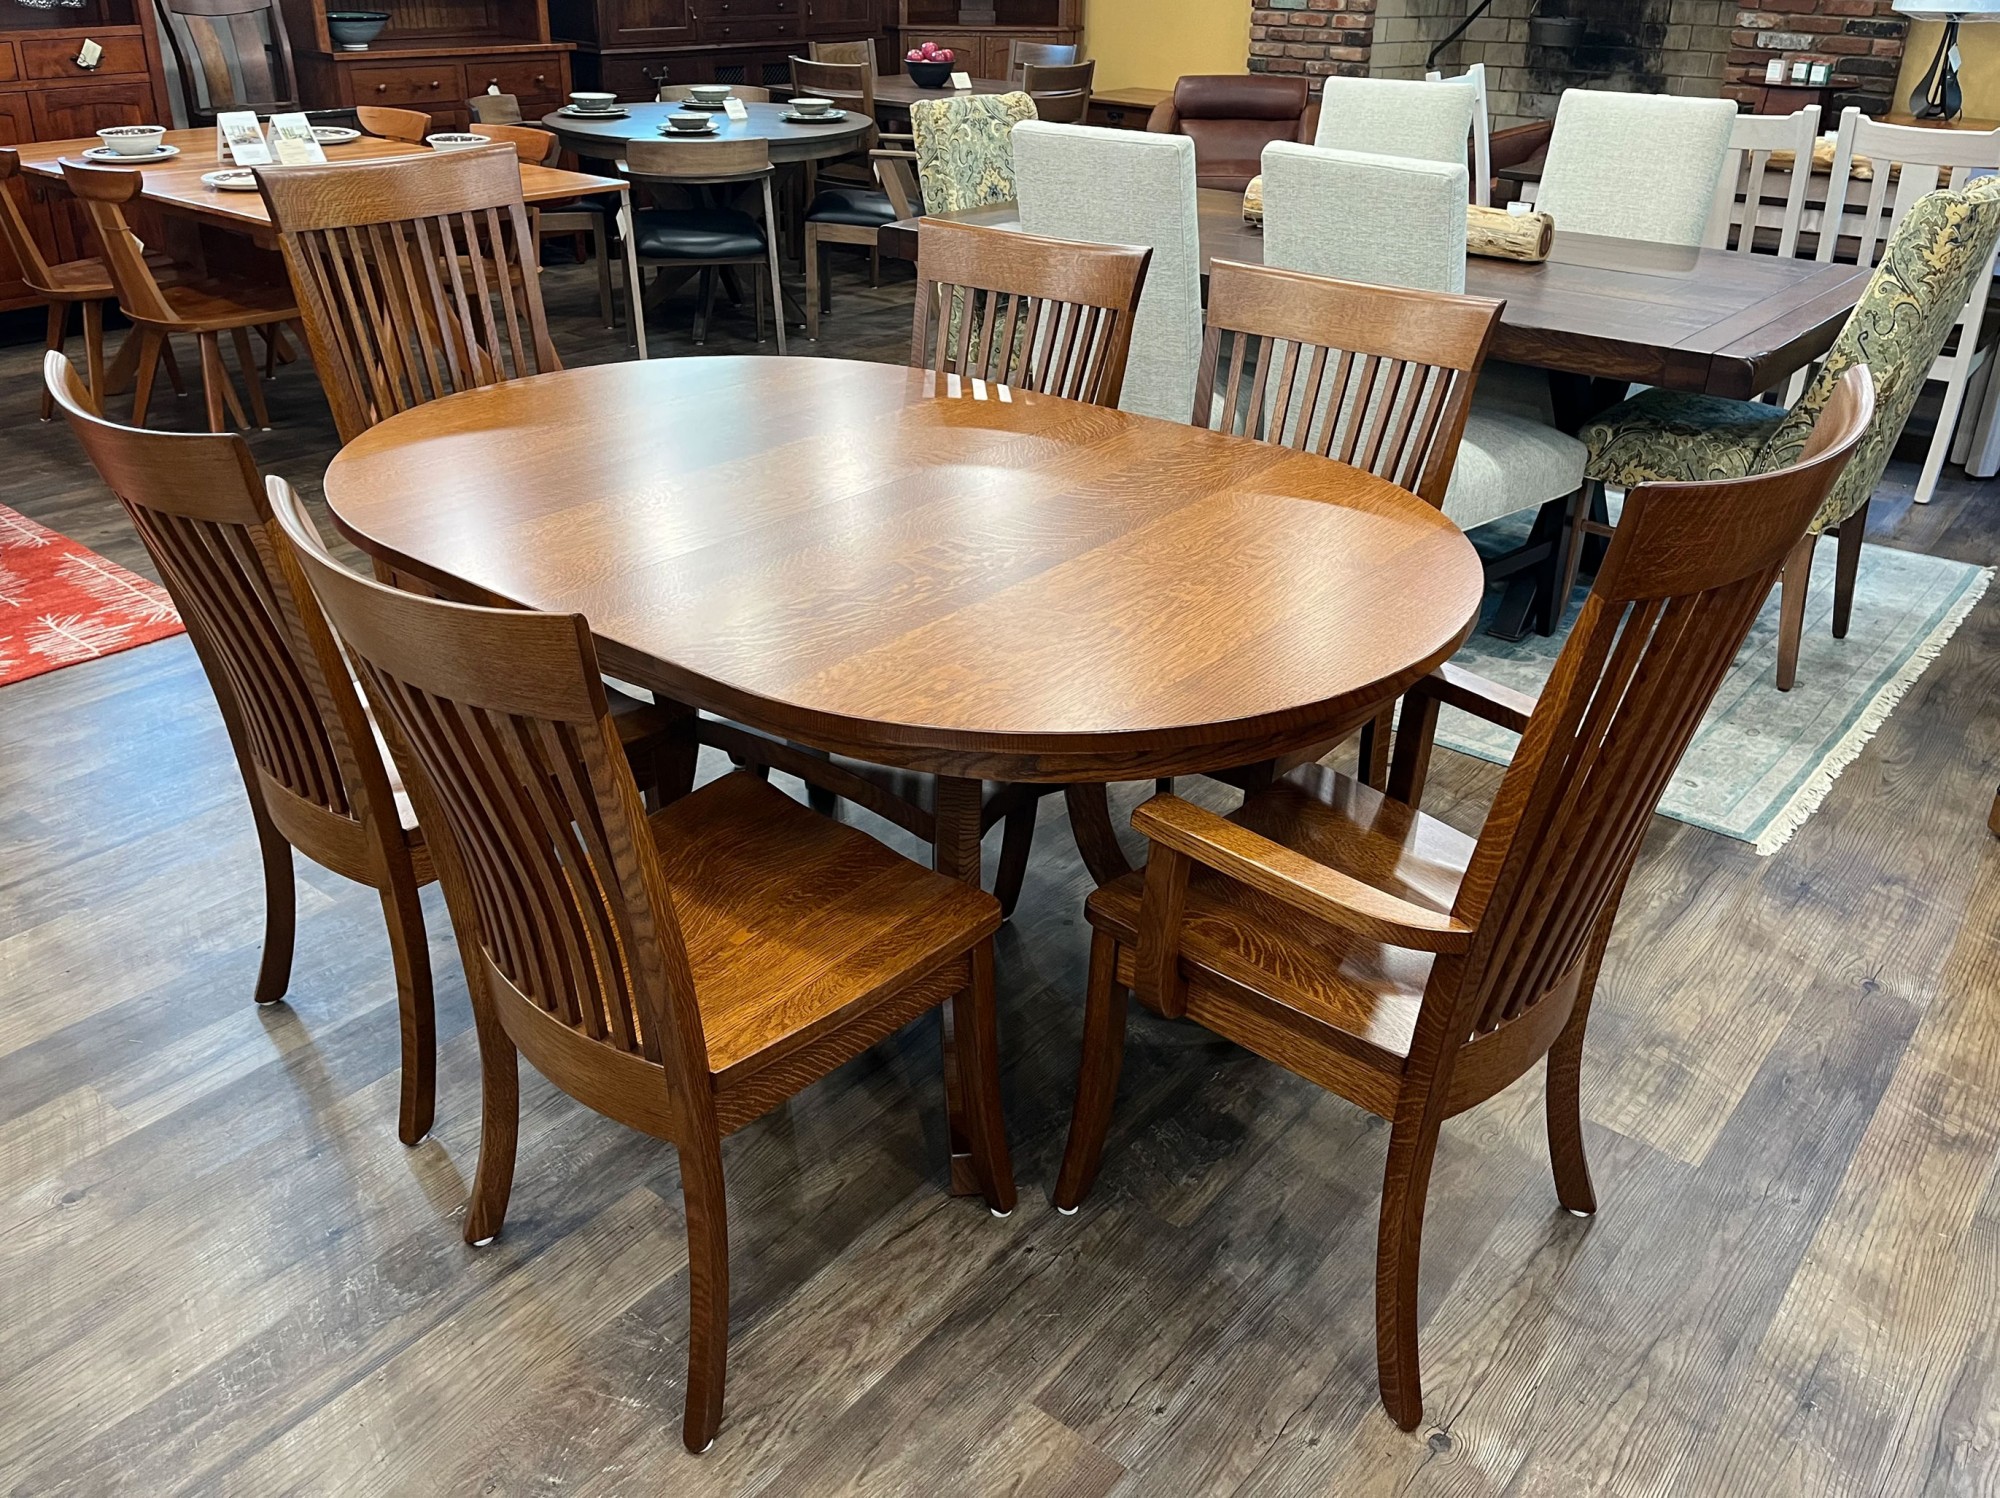 Old World 44 x 66 Dining Table with (1) 18 inch Butterfly Leaf and (6) Dining Chairs